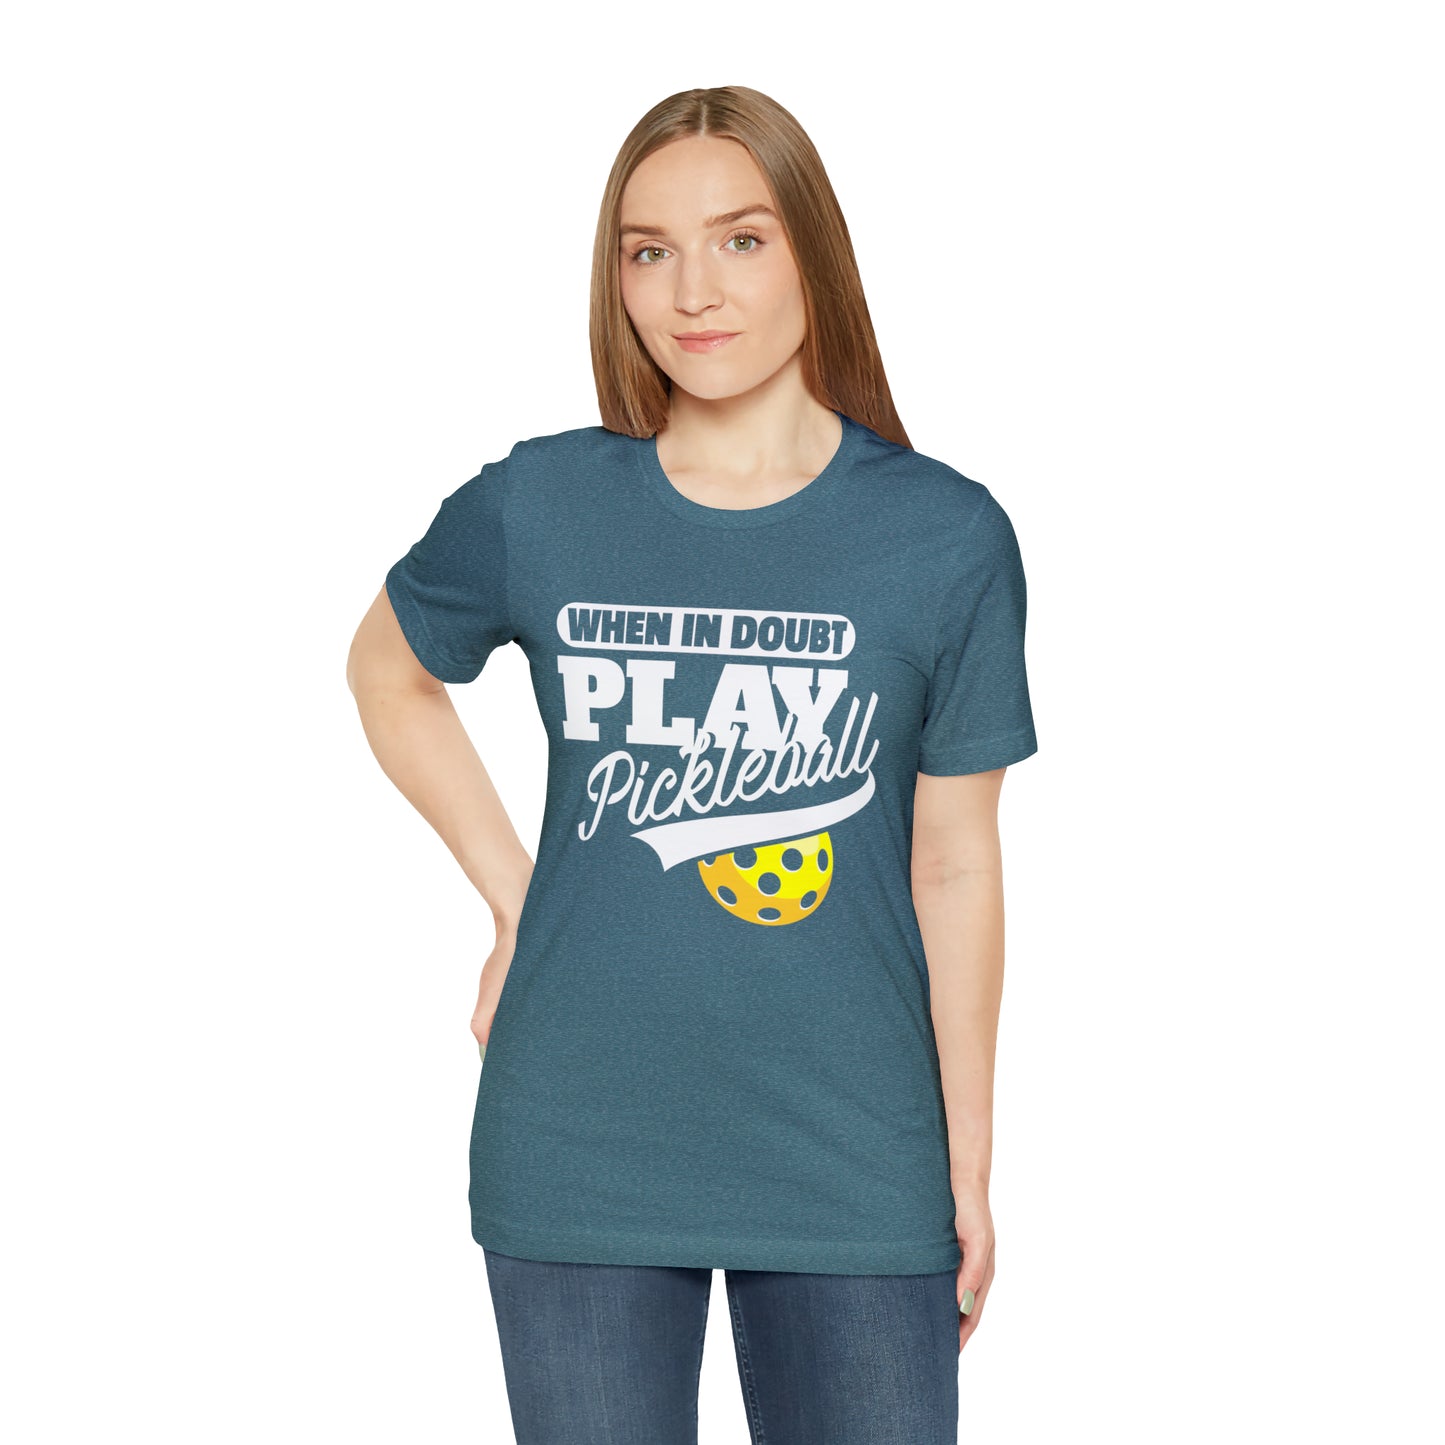 When in Doubt, Play Pickleball!